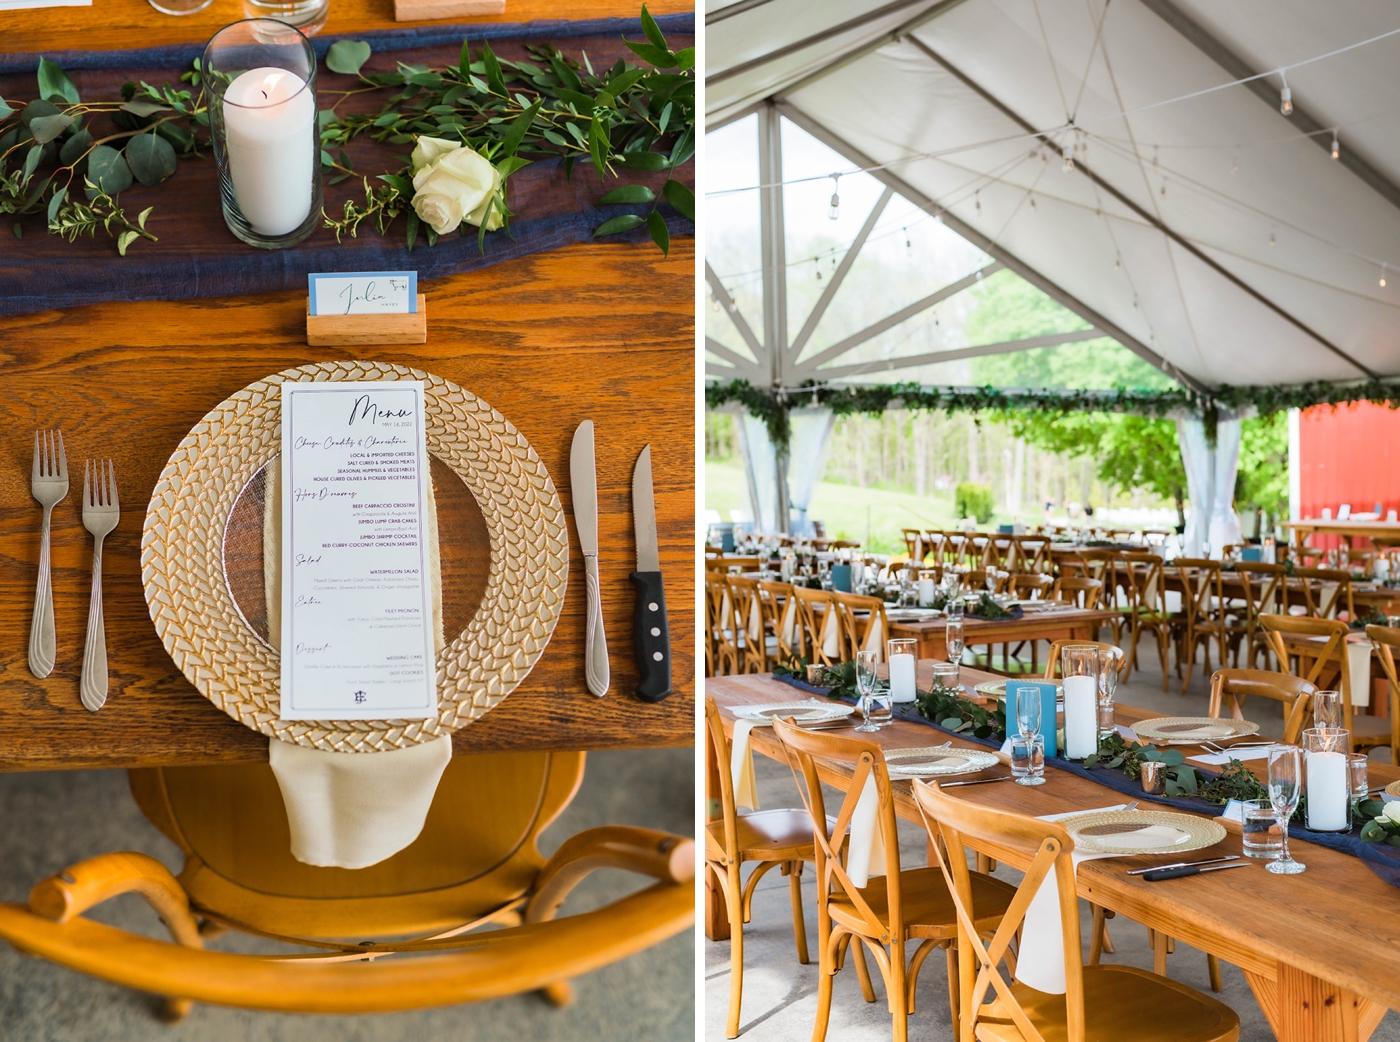 Farm tables, navy gauze runners, white pillar candles, and greenery for a spring wedding reception